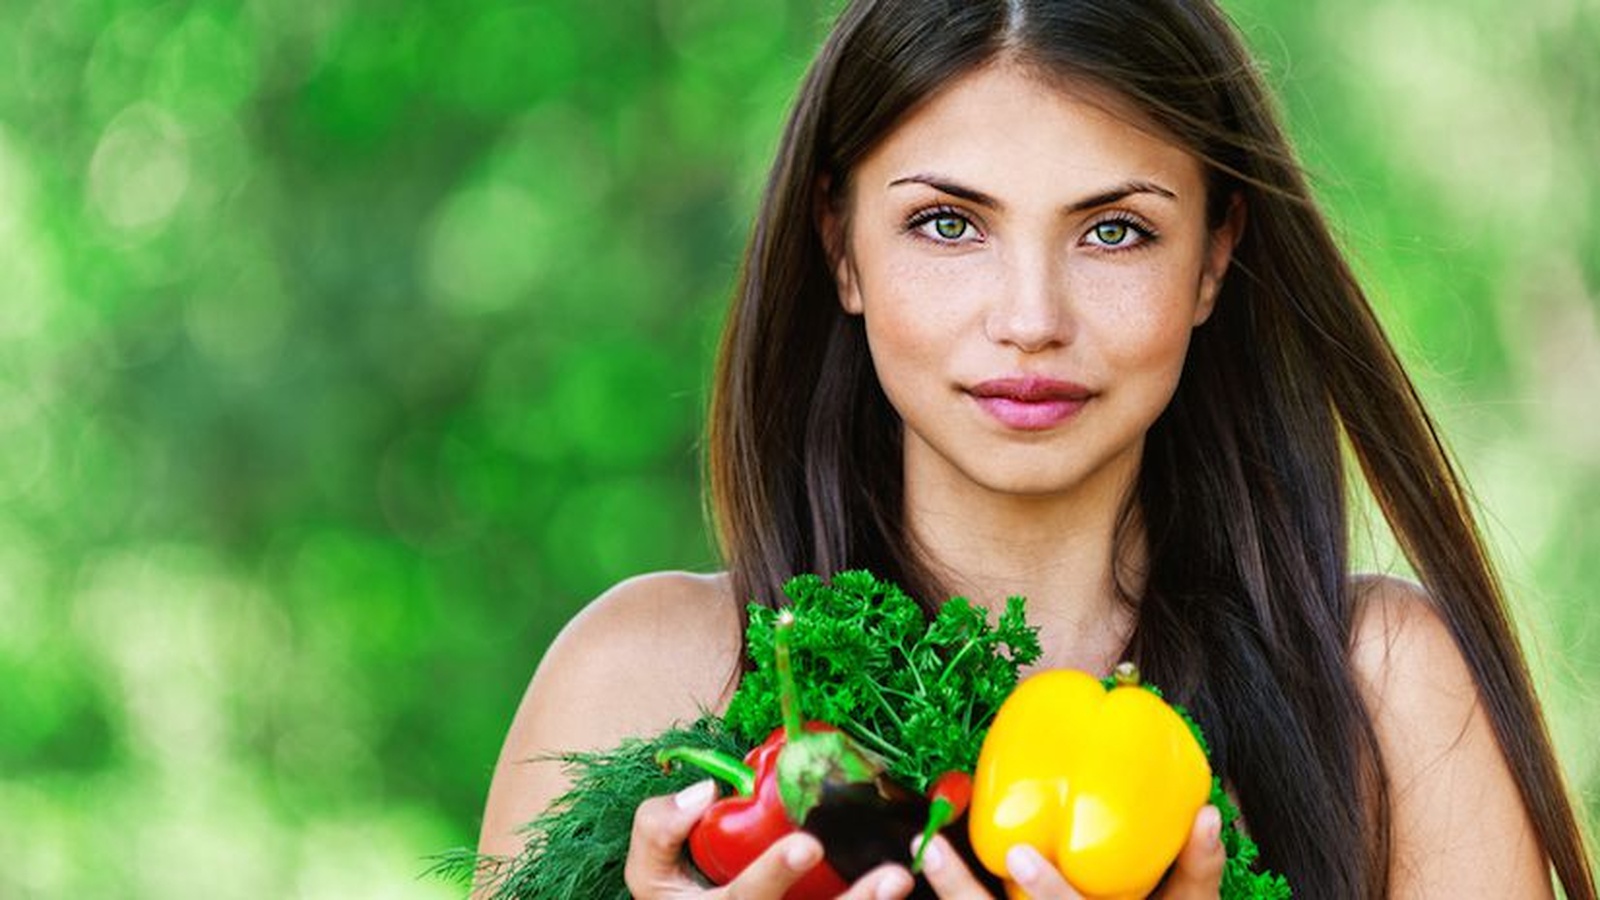 8 Foods to Start Eating Every Week if You Want Beautiful, Healthy Skin